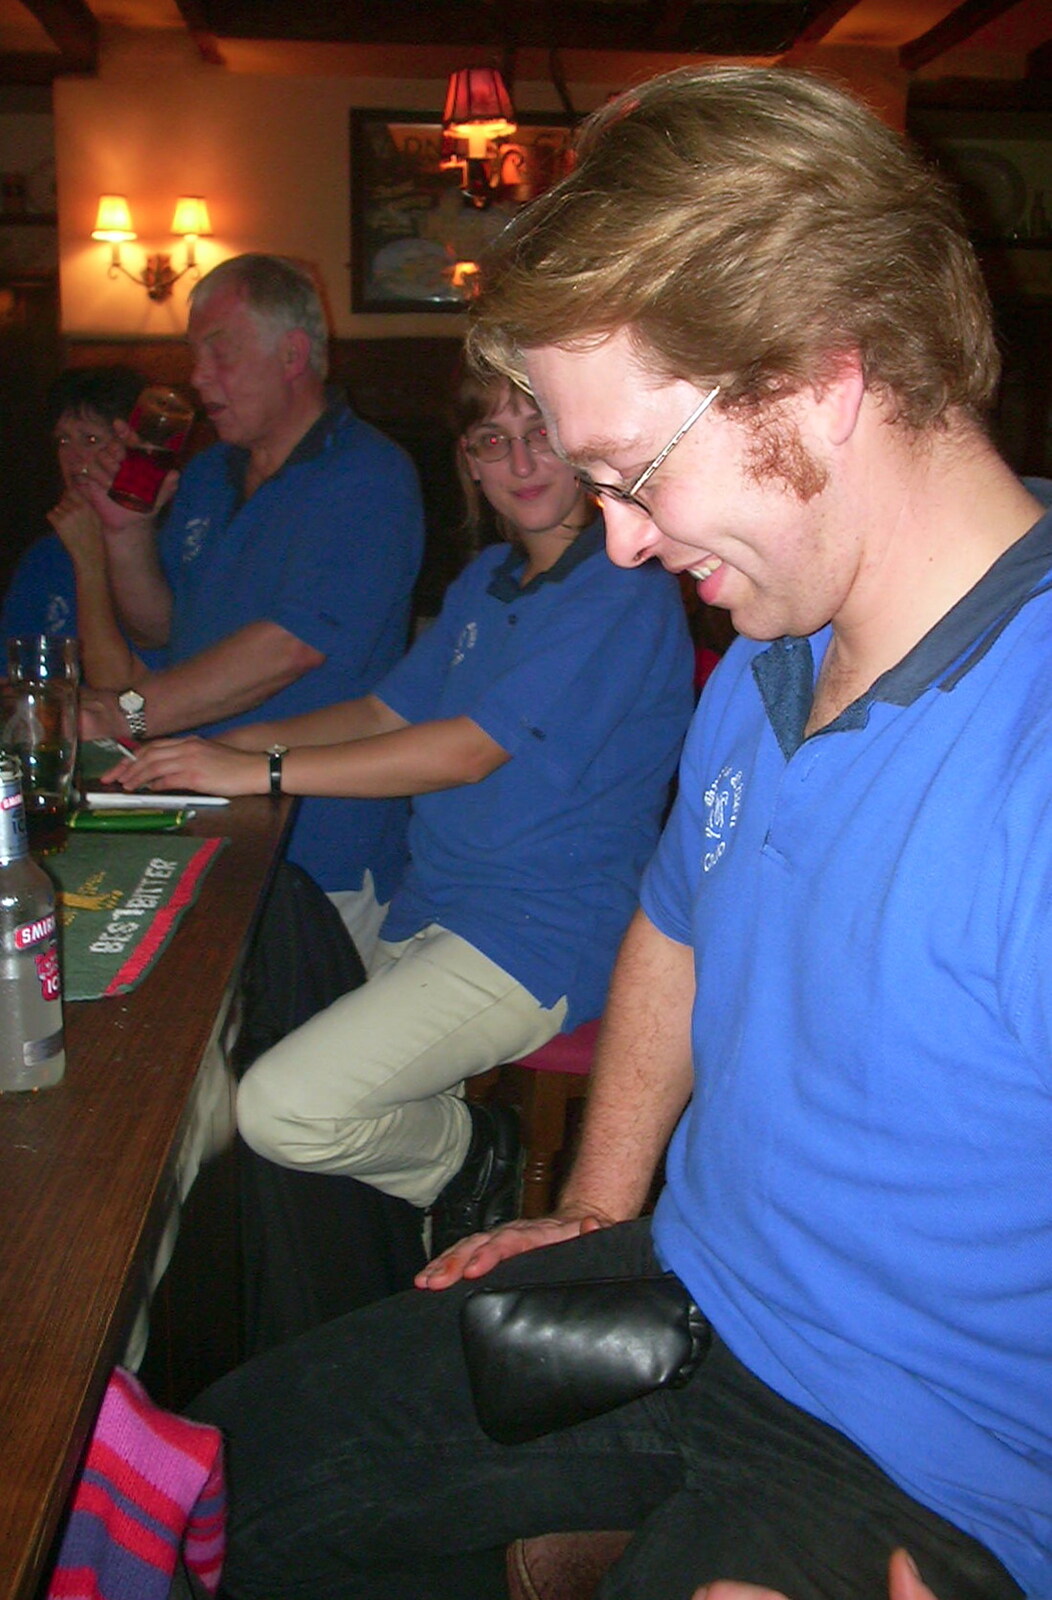 A BSCC Presentation, Brome Swan, Suffolk - 9th November 2002: Marc has something attached to his groin